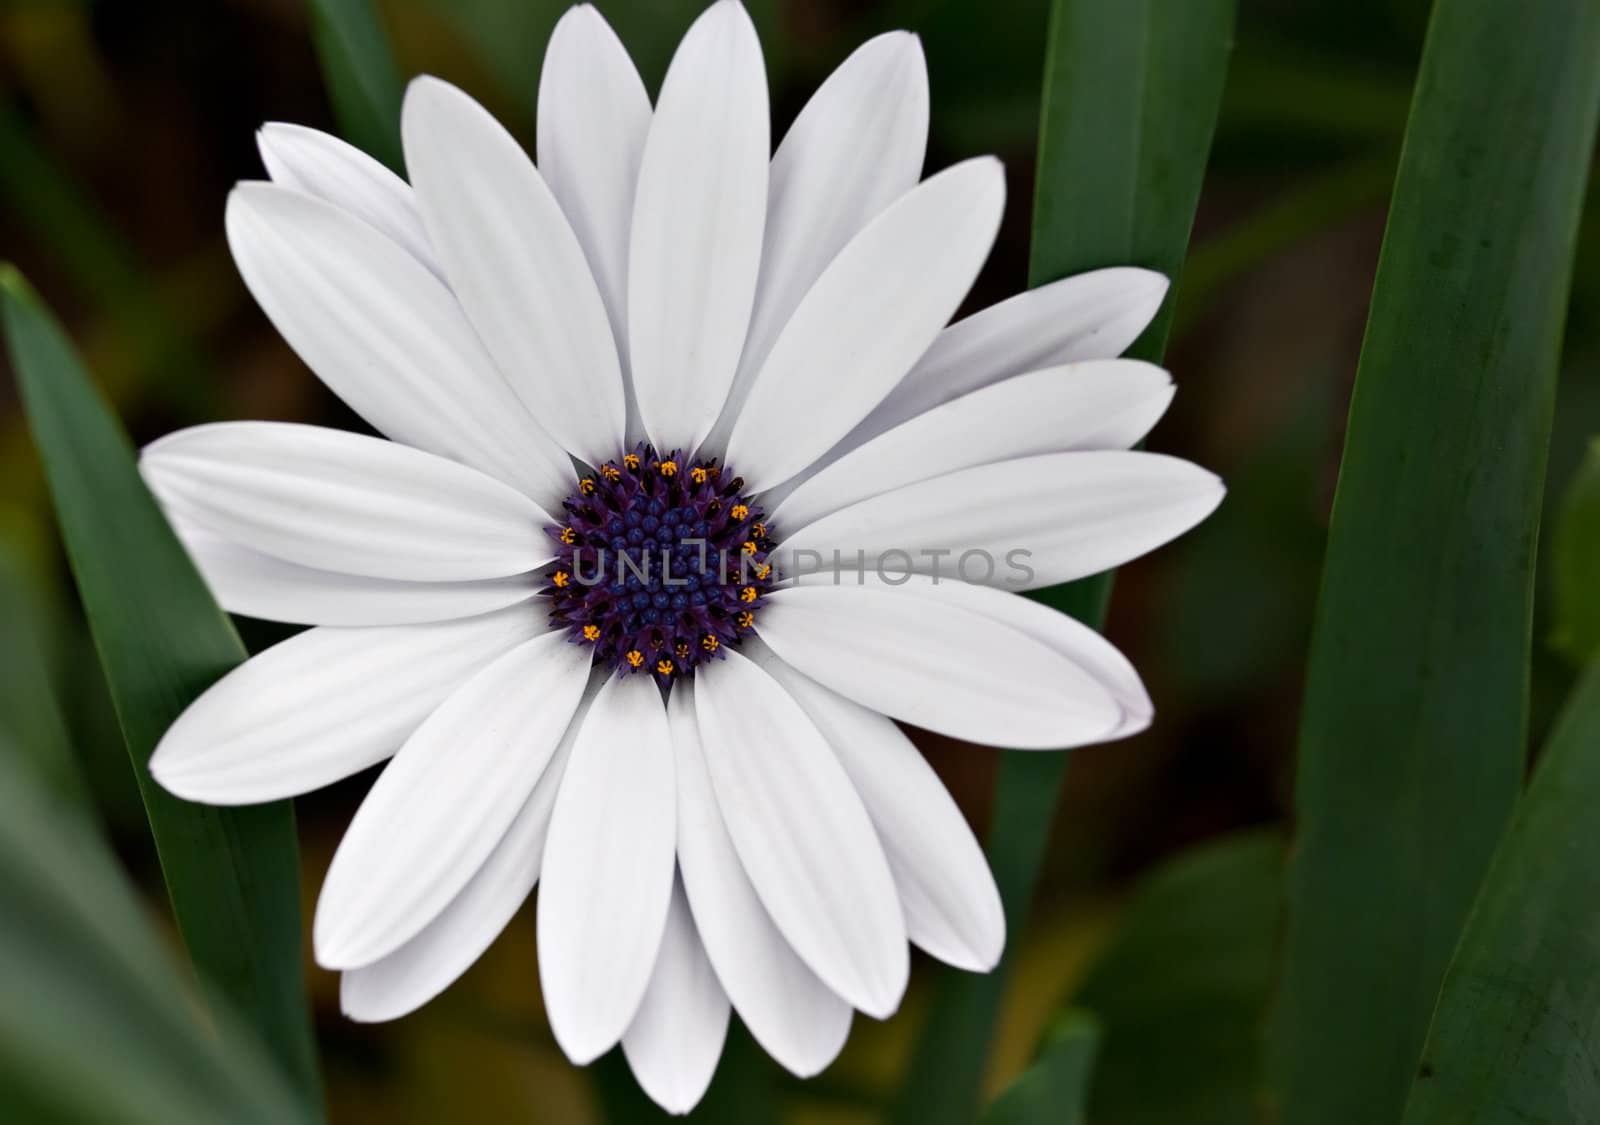 beautiful white daisy sticks out from amongst the leaves